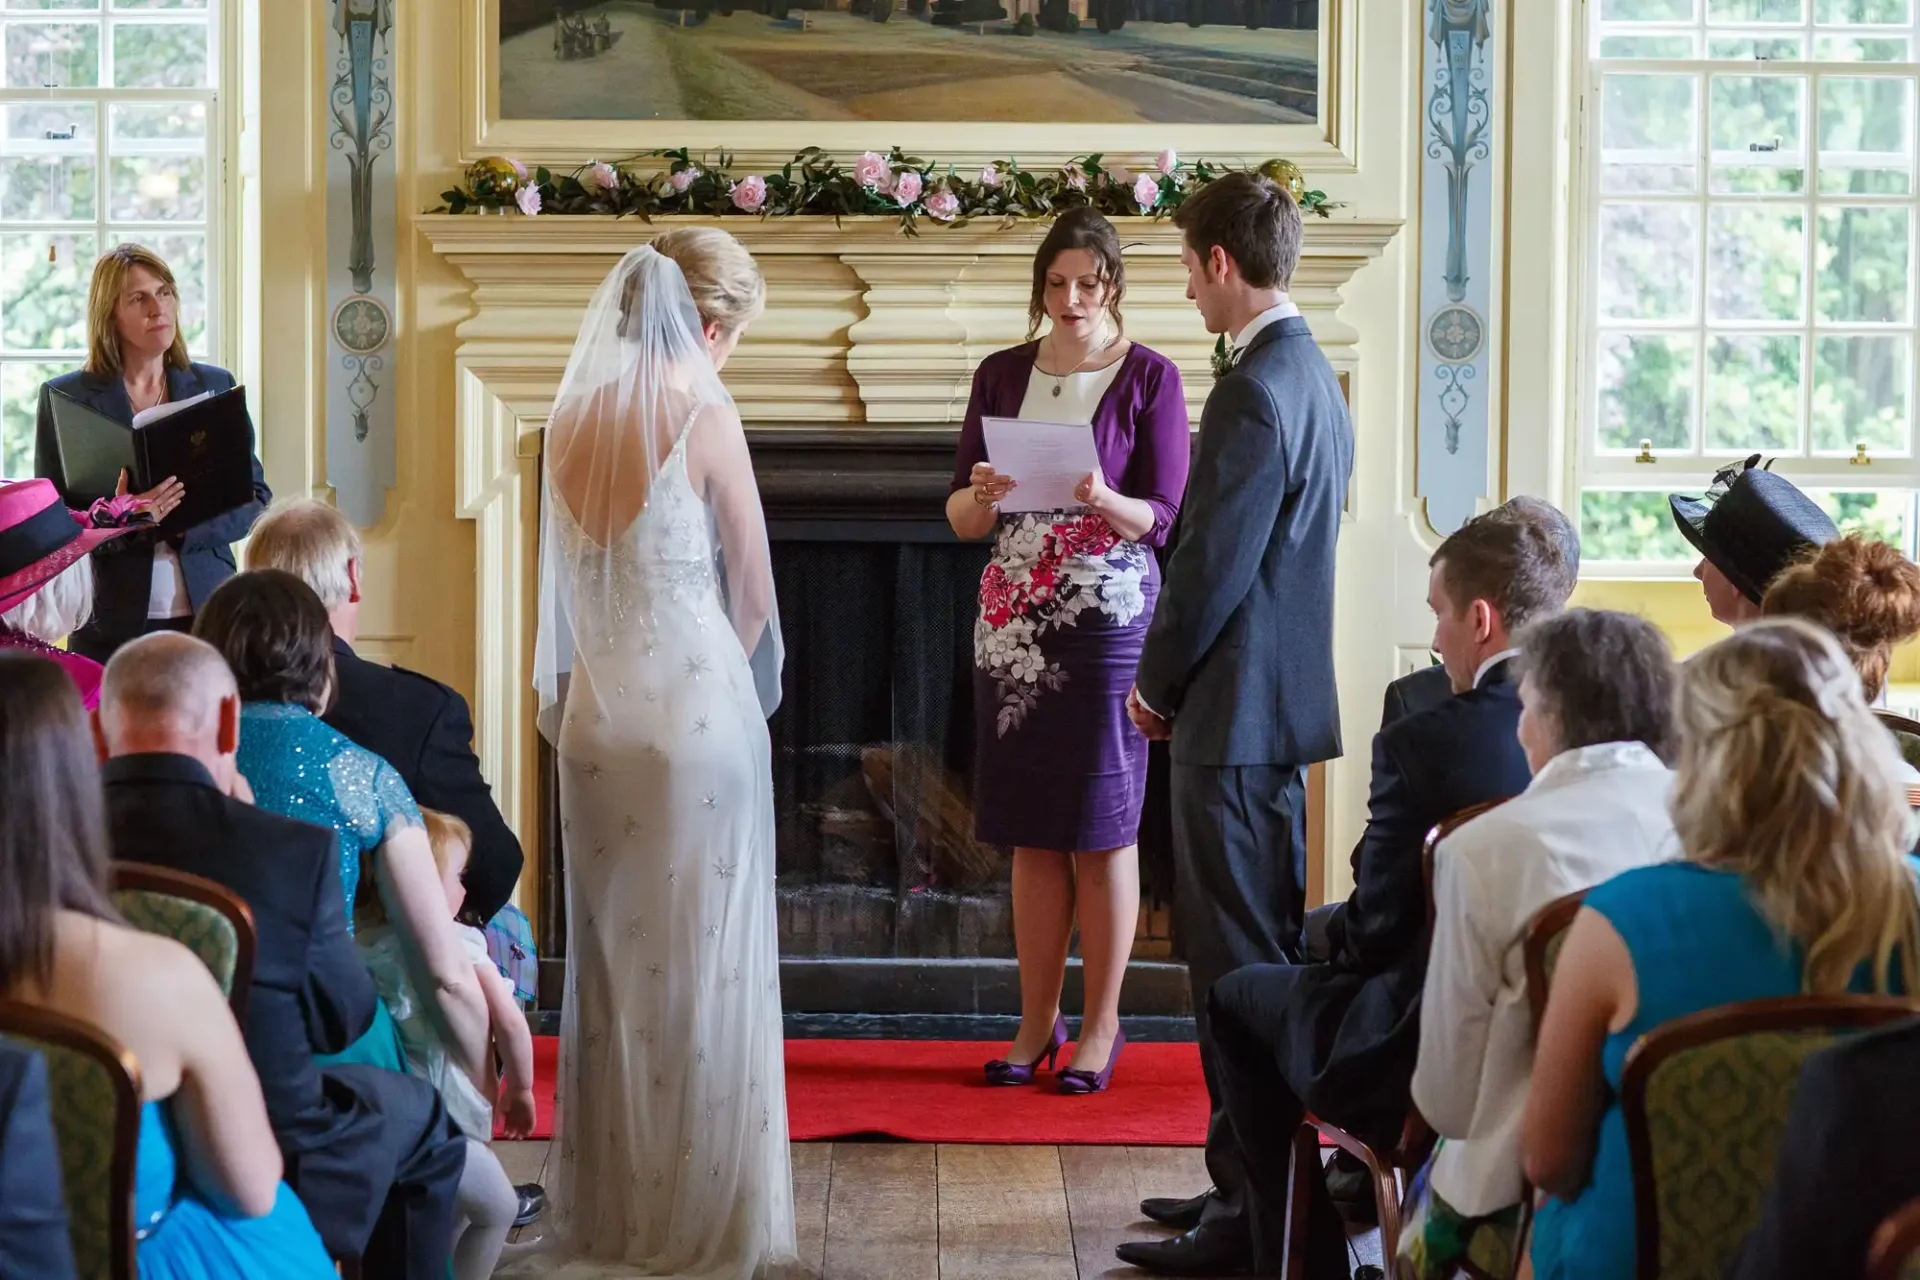 A bride and groom stand before an officiant during a wedding ceremony, with guests seated around them in a decorated room.